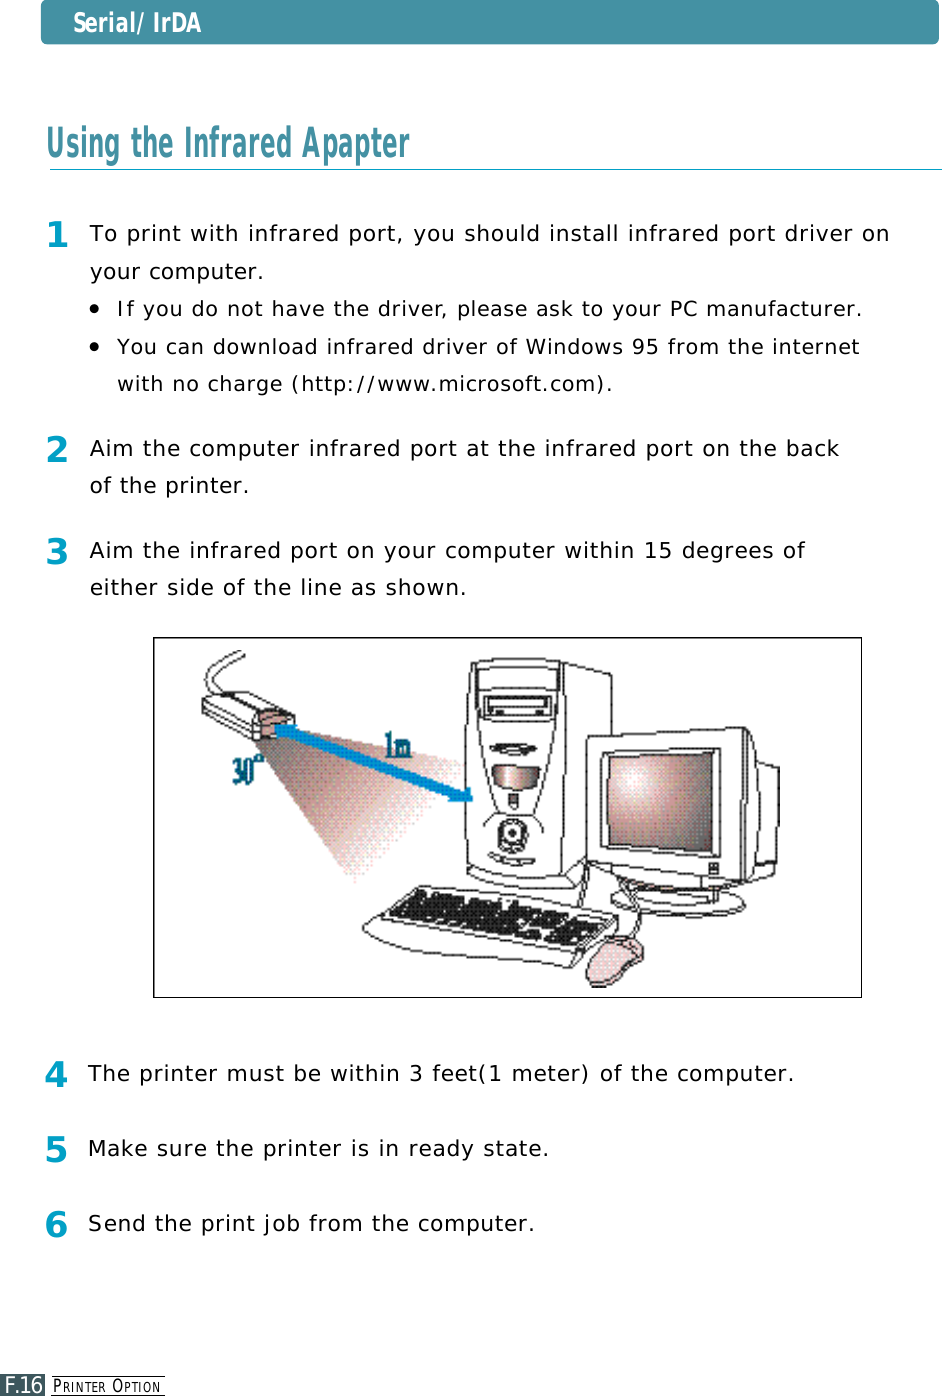 PR I N T E R OP T I O NF.16Serial/IrDA1To print with infrared port, you should install infrared port driver onyour computer.●If you do not have the drive r, please ask to your PC manufacturer.●You can download infrared driver of Windows 95 from the internet with no charge (http://www. m i c r o s o f t . c o m ) .2Aim the computer infrared port at the infrared port on the back of the printer.3Aim the infrared port on your computer within 15 degrees of either side of the line as shown.4The printer must be within 3 feet(1 meter) of the computer.5M a ke sure the printer is in ready state.6Send the print job from the computer.Using the Infrared Apapter